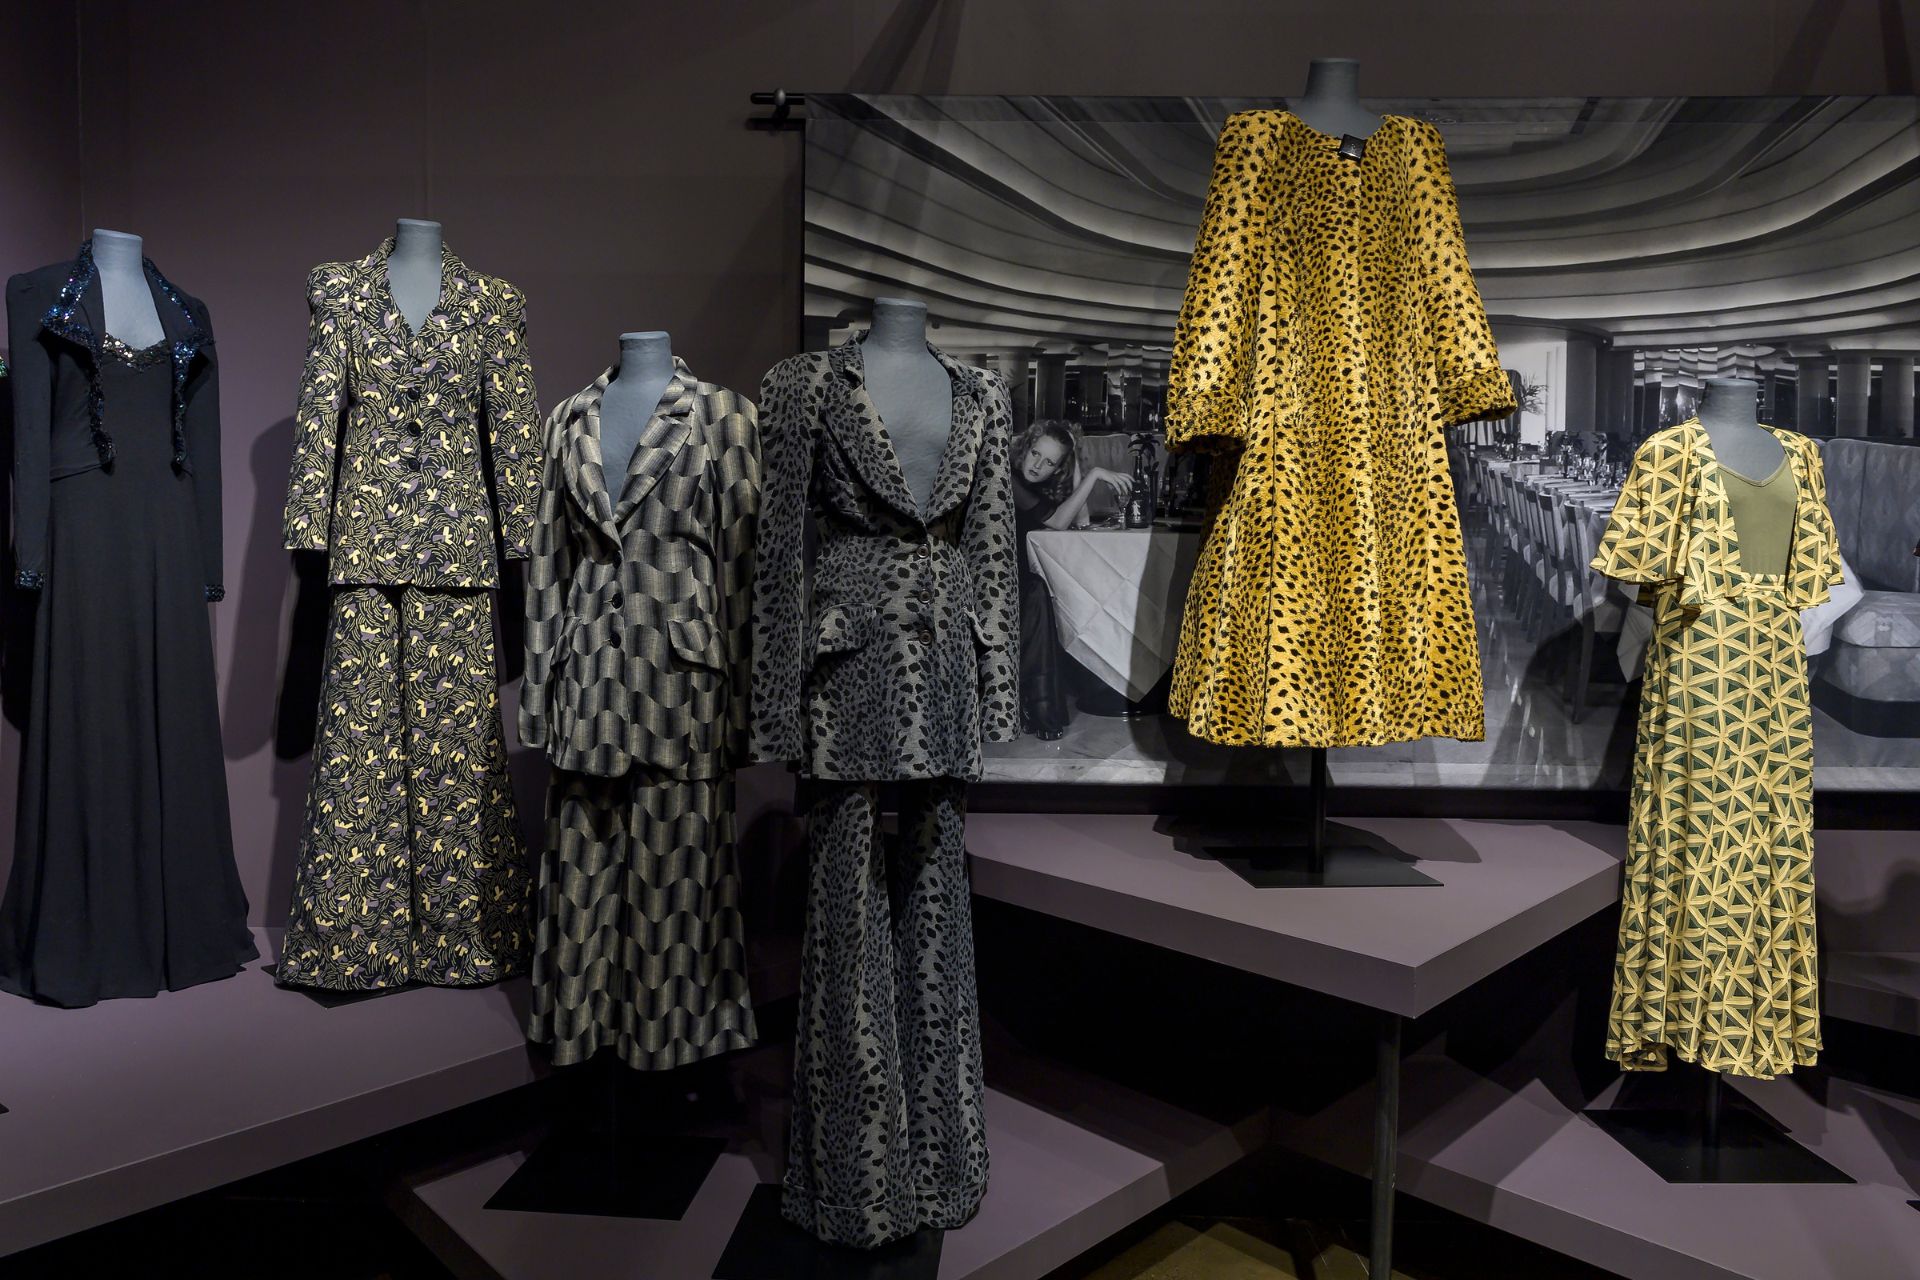 Everything You Need To Know About The BIBA Exhibition At The Fashion & Textile Museum